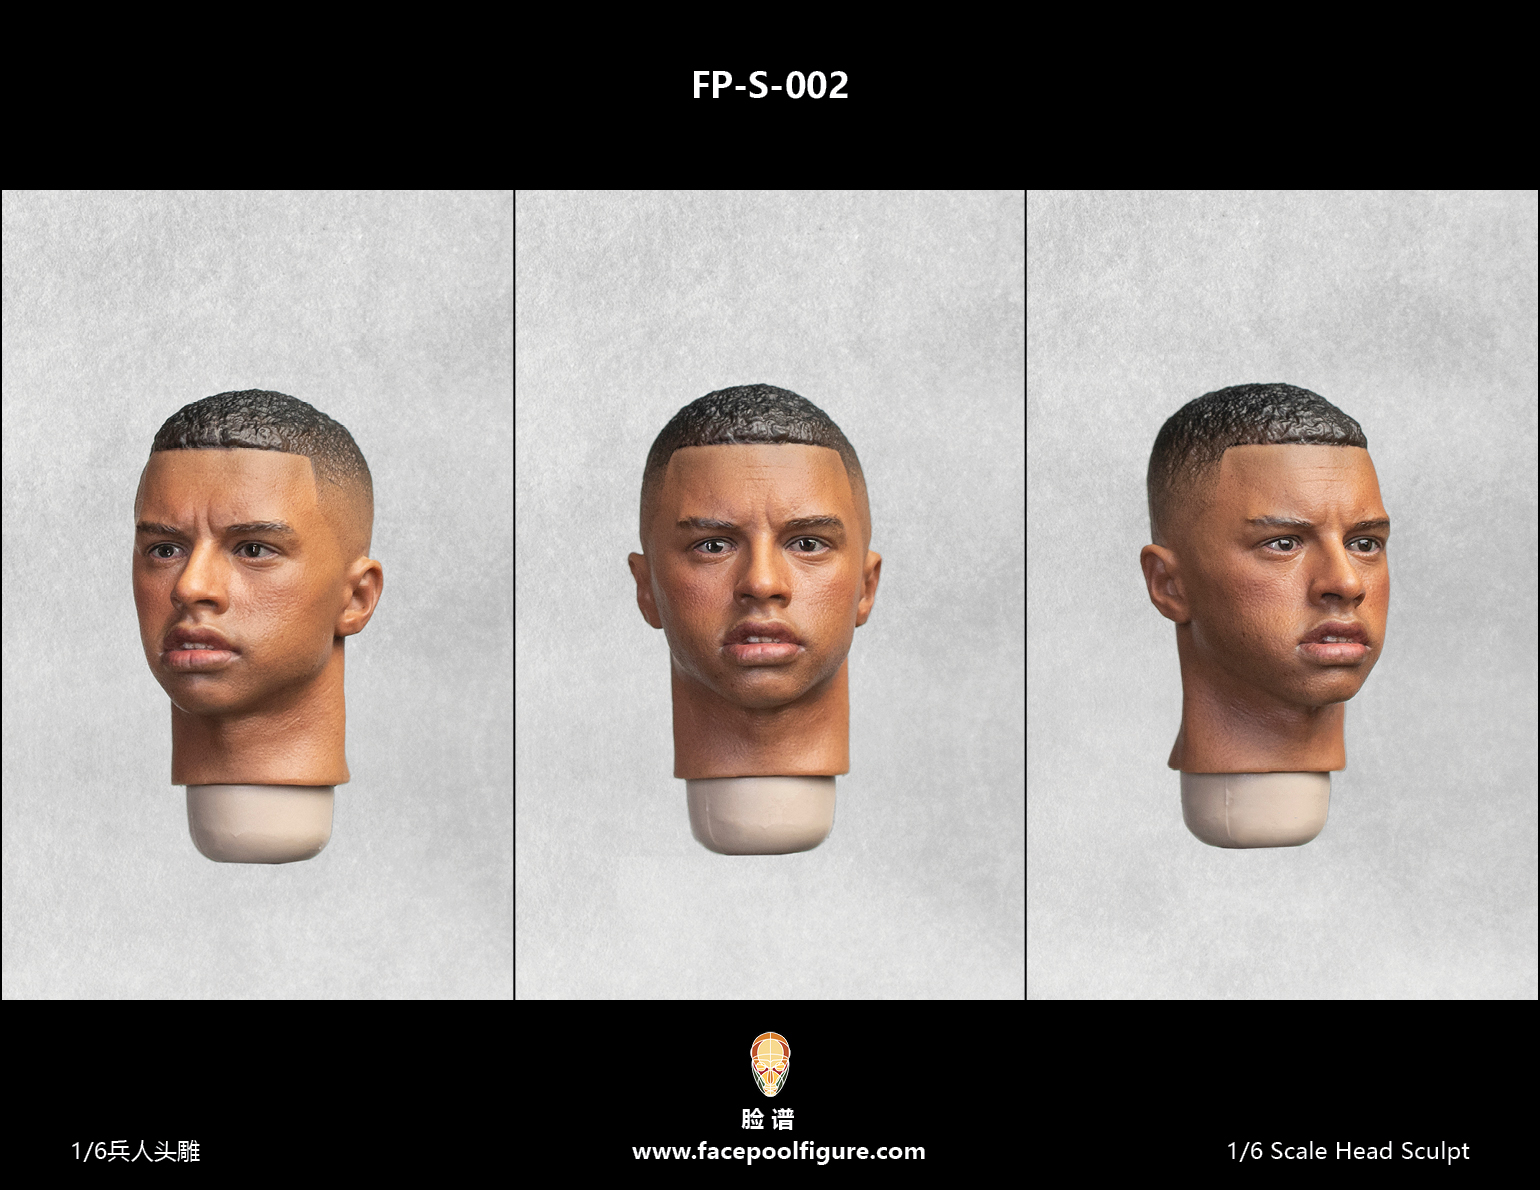 FacepoolFigure 1/6 Black Male Head with Store Facepoolfigure Expression Sculpt Online FP-S-002 –